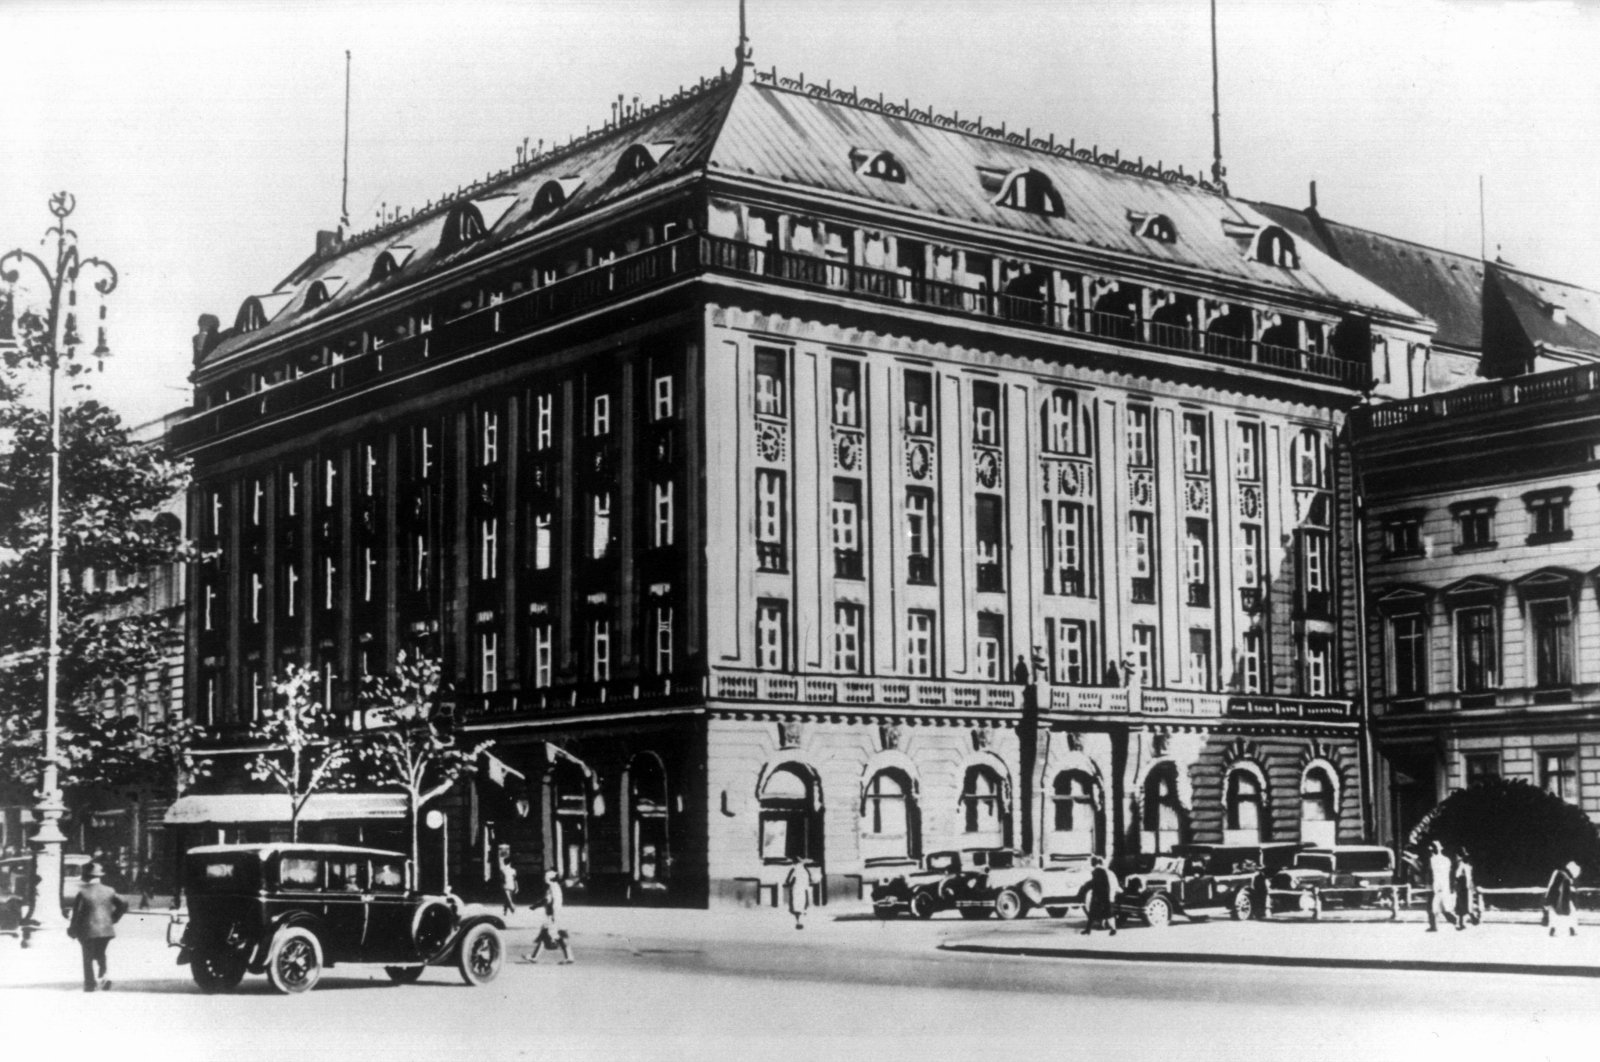 The original Adlon building dating back to 1907, which was almost completely destroyed during World War II. (DPA Photo)